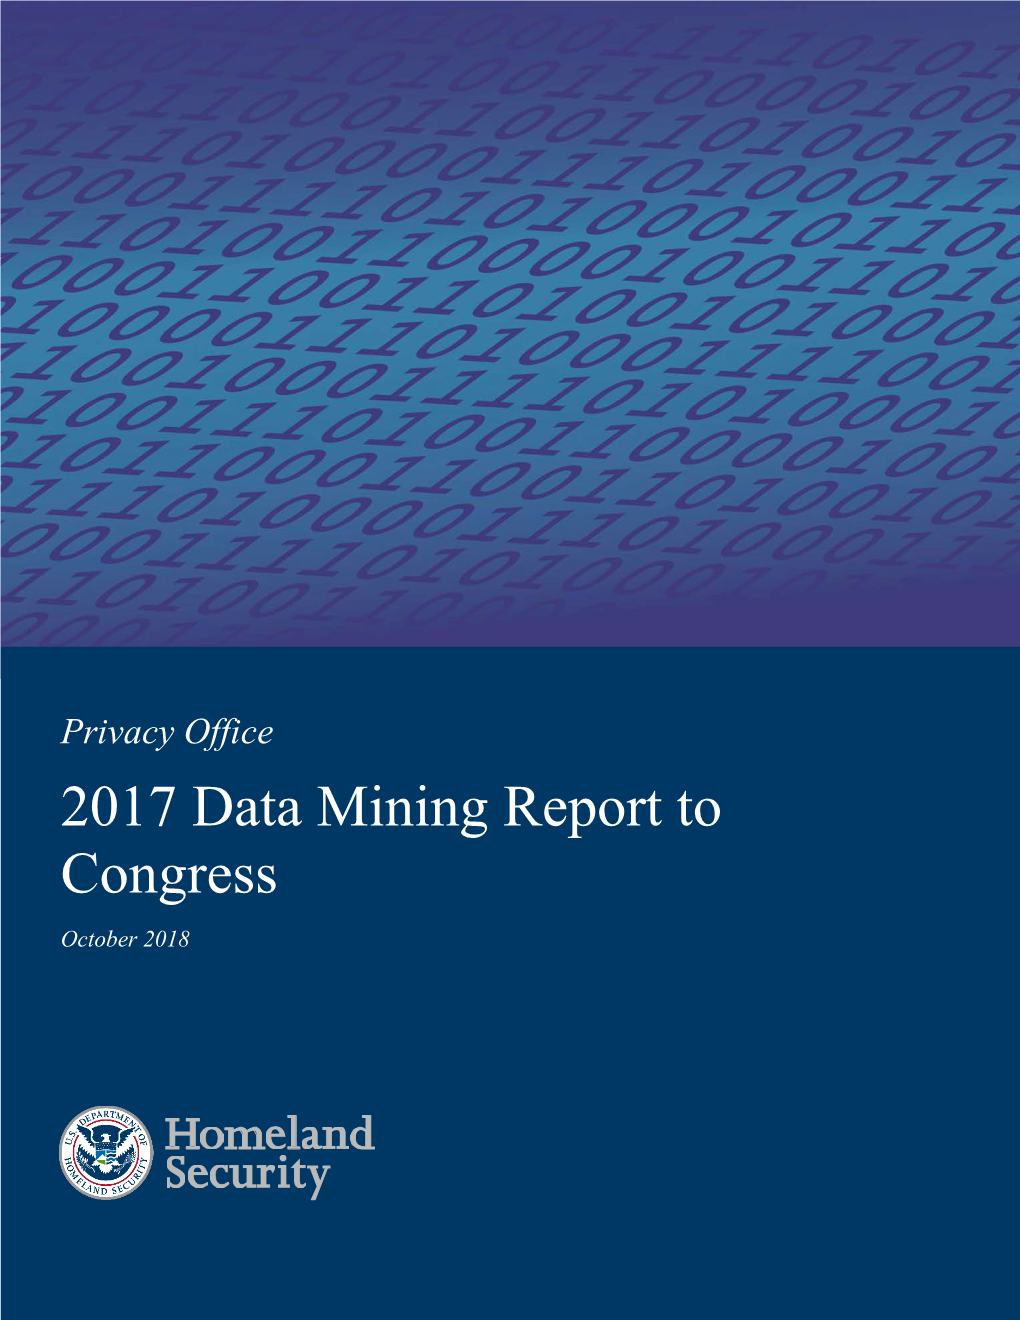 2017 Data Mining Report to Congress October 2018 2017 DHS Data Mining Report